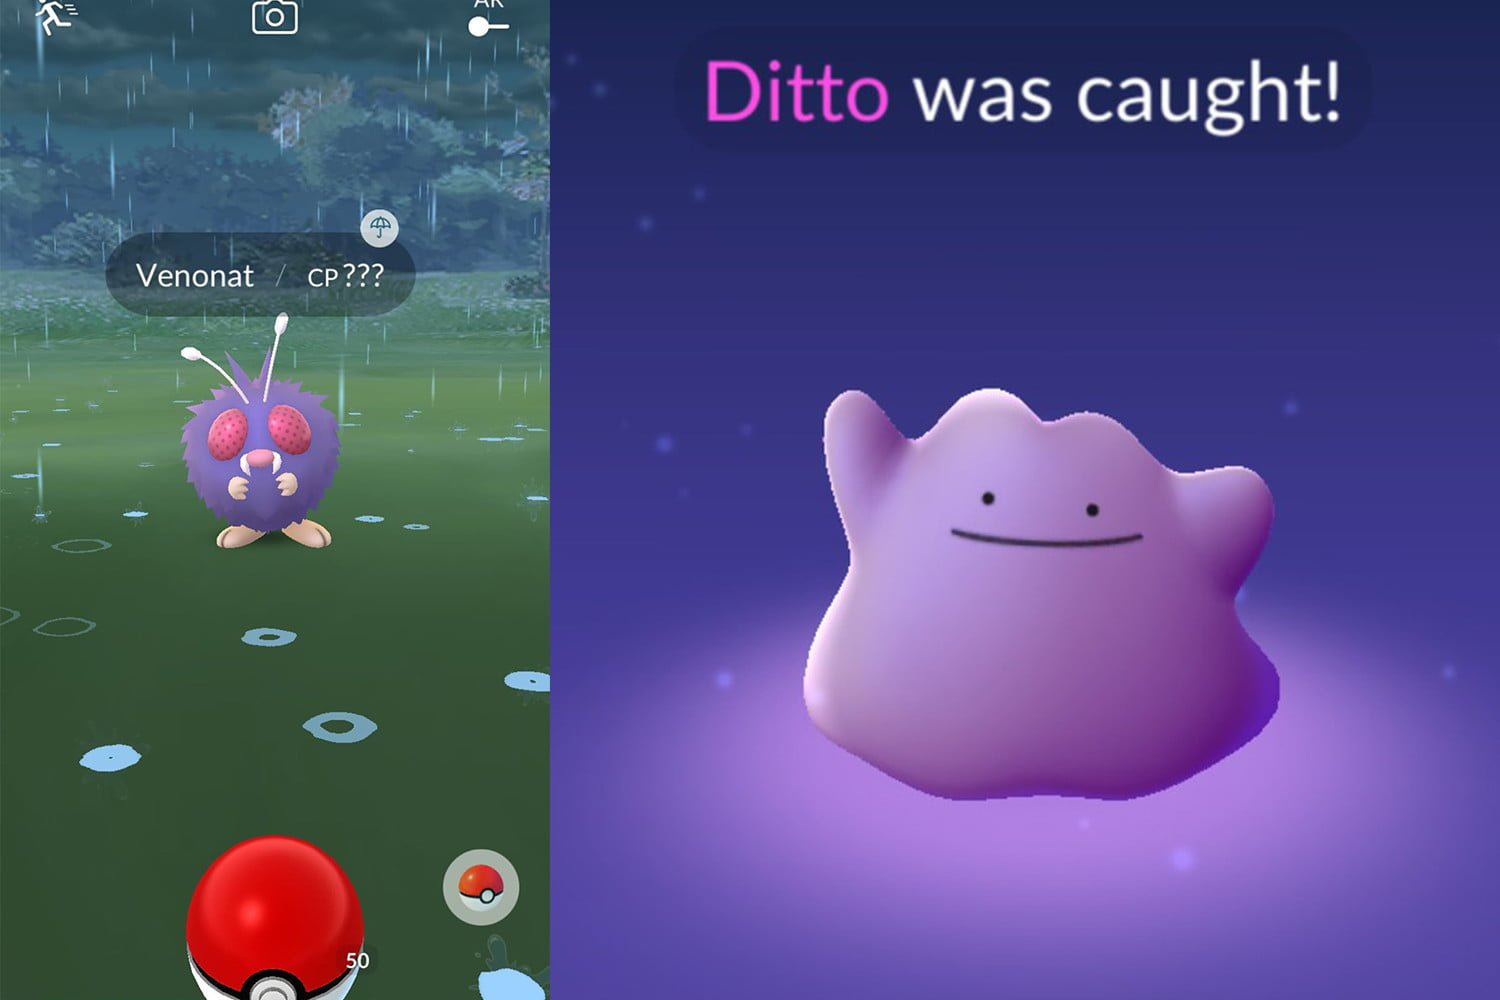 How to Get a Ditto in Pokemon Go?